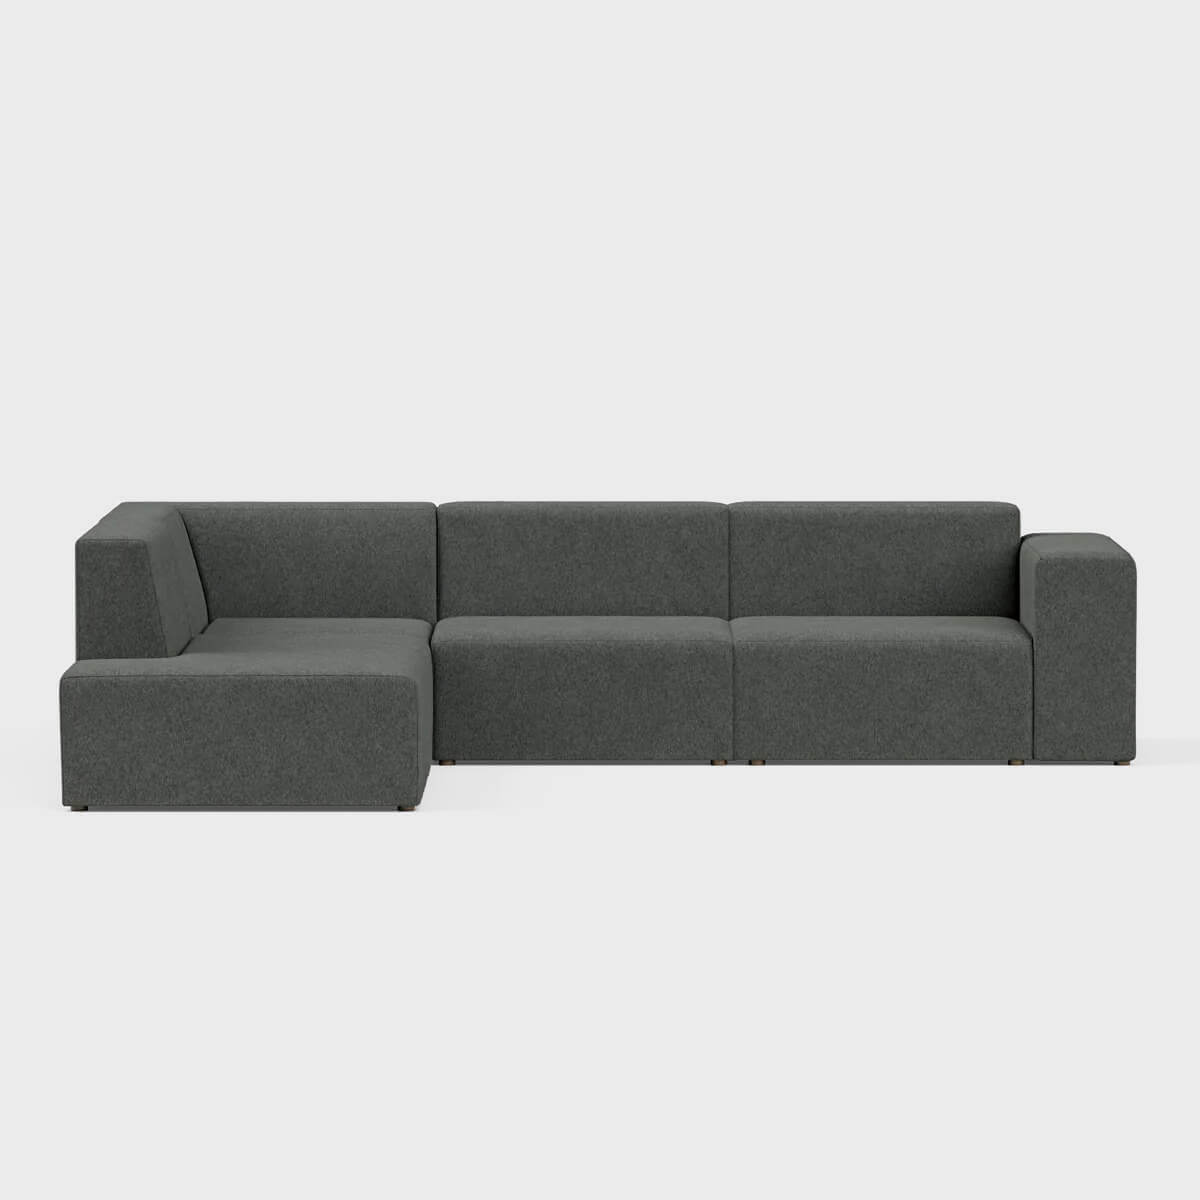 The Floyd Four Piece Form Sectional